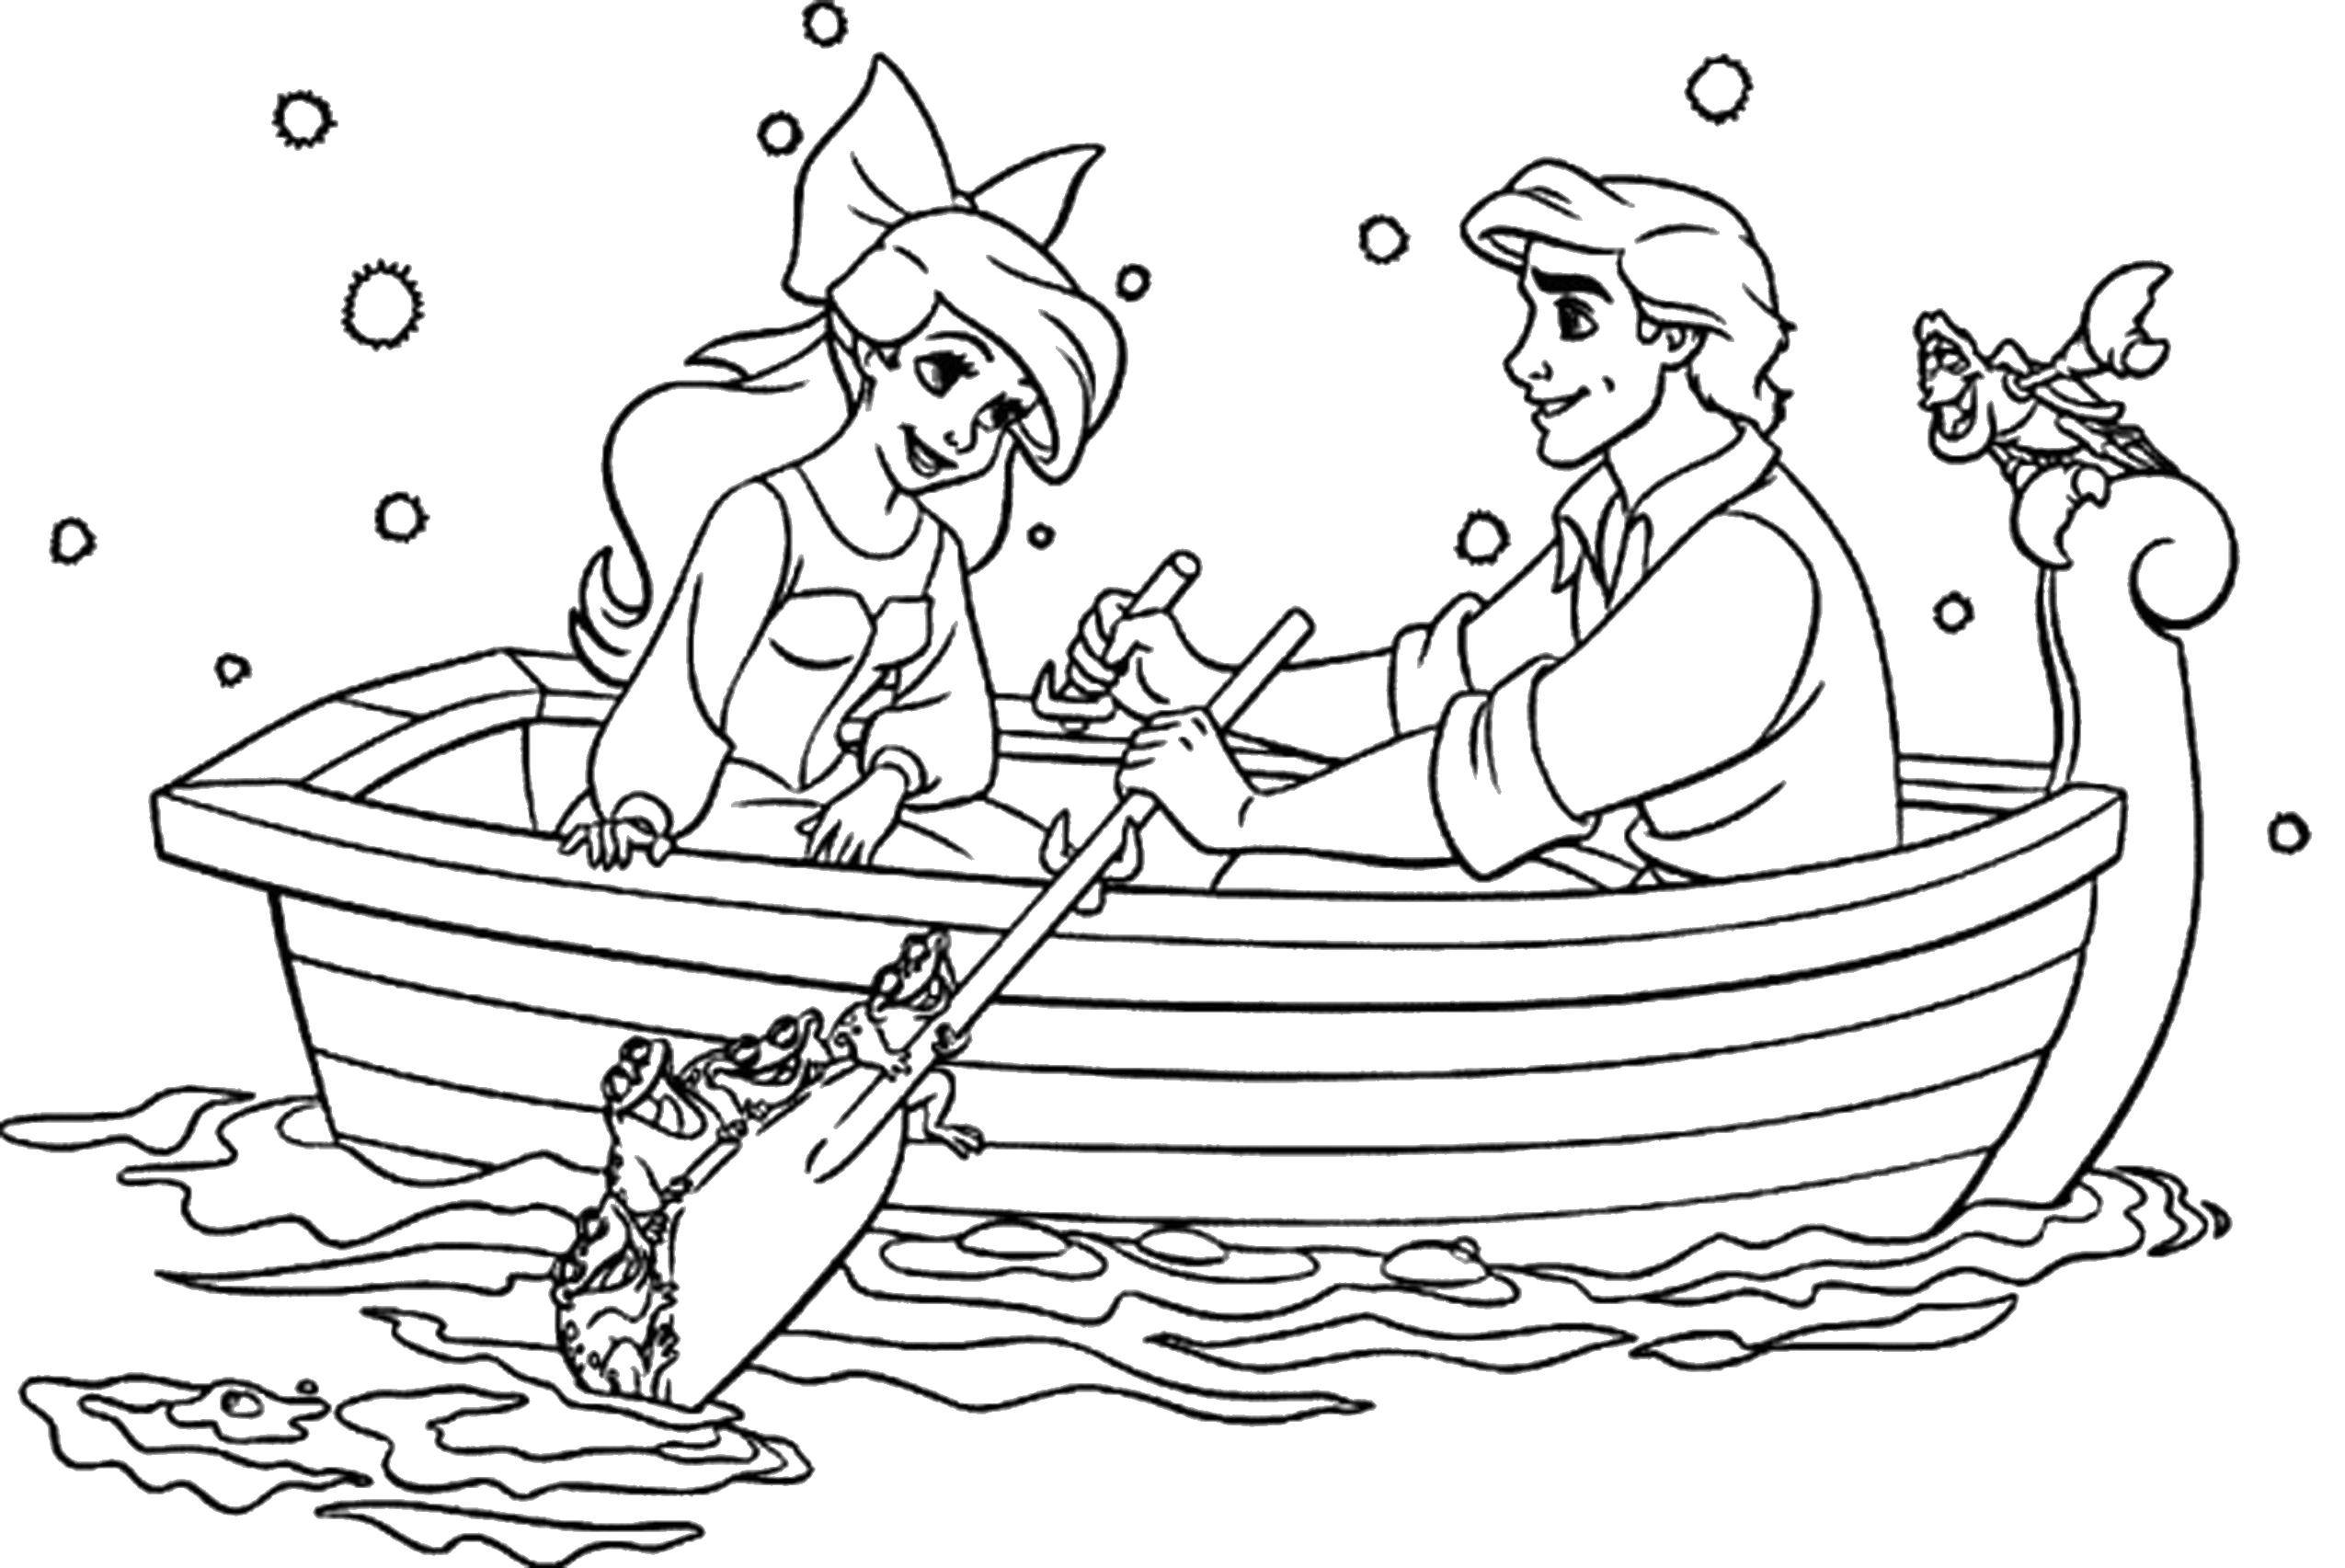 Coloring Ariel with her beloved. Category Disney coloring pages. Tags:  Disney, the little mermaid, Ariel.